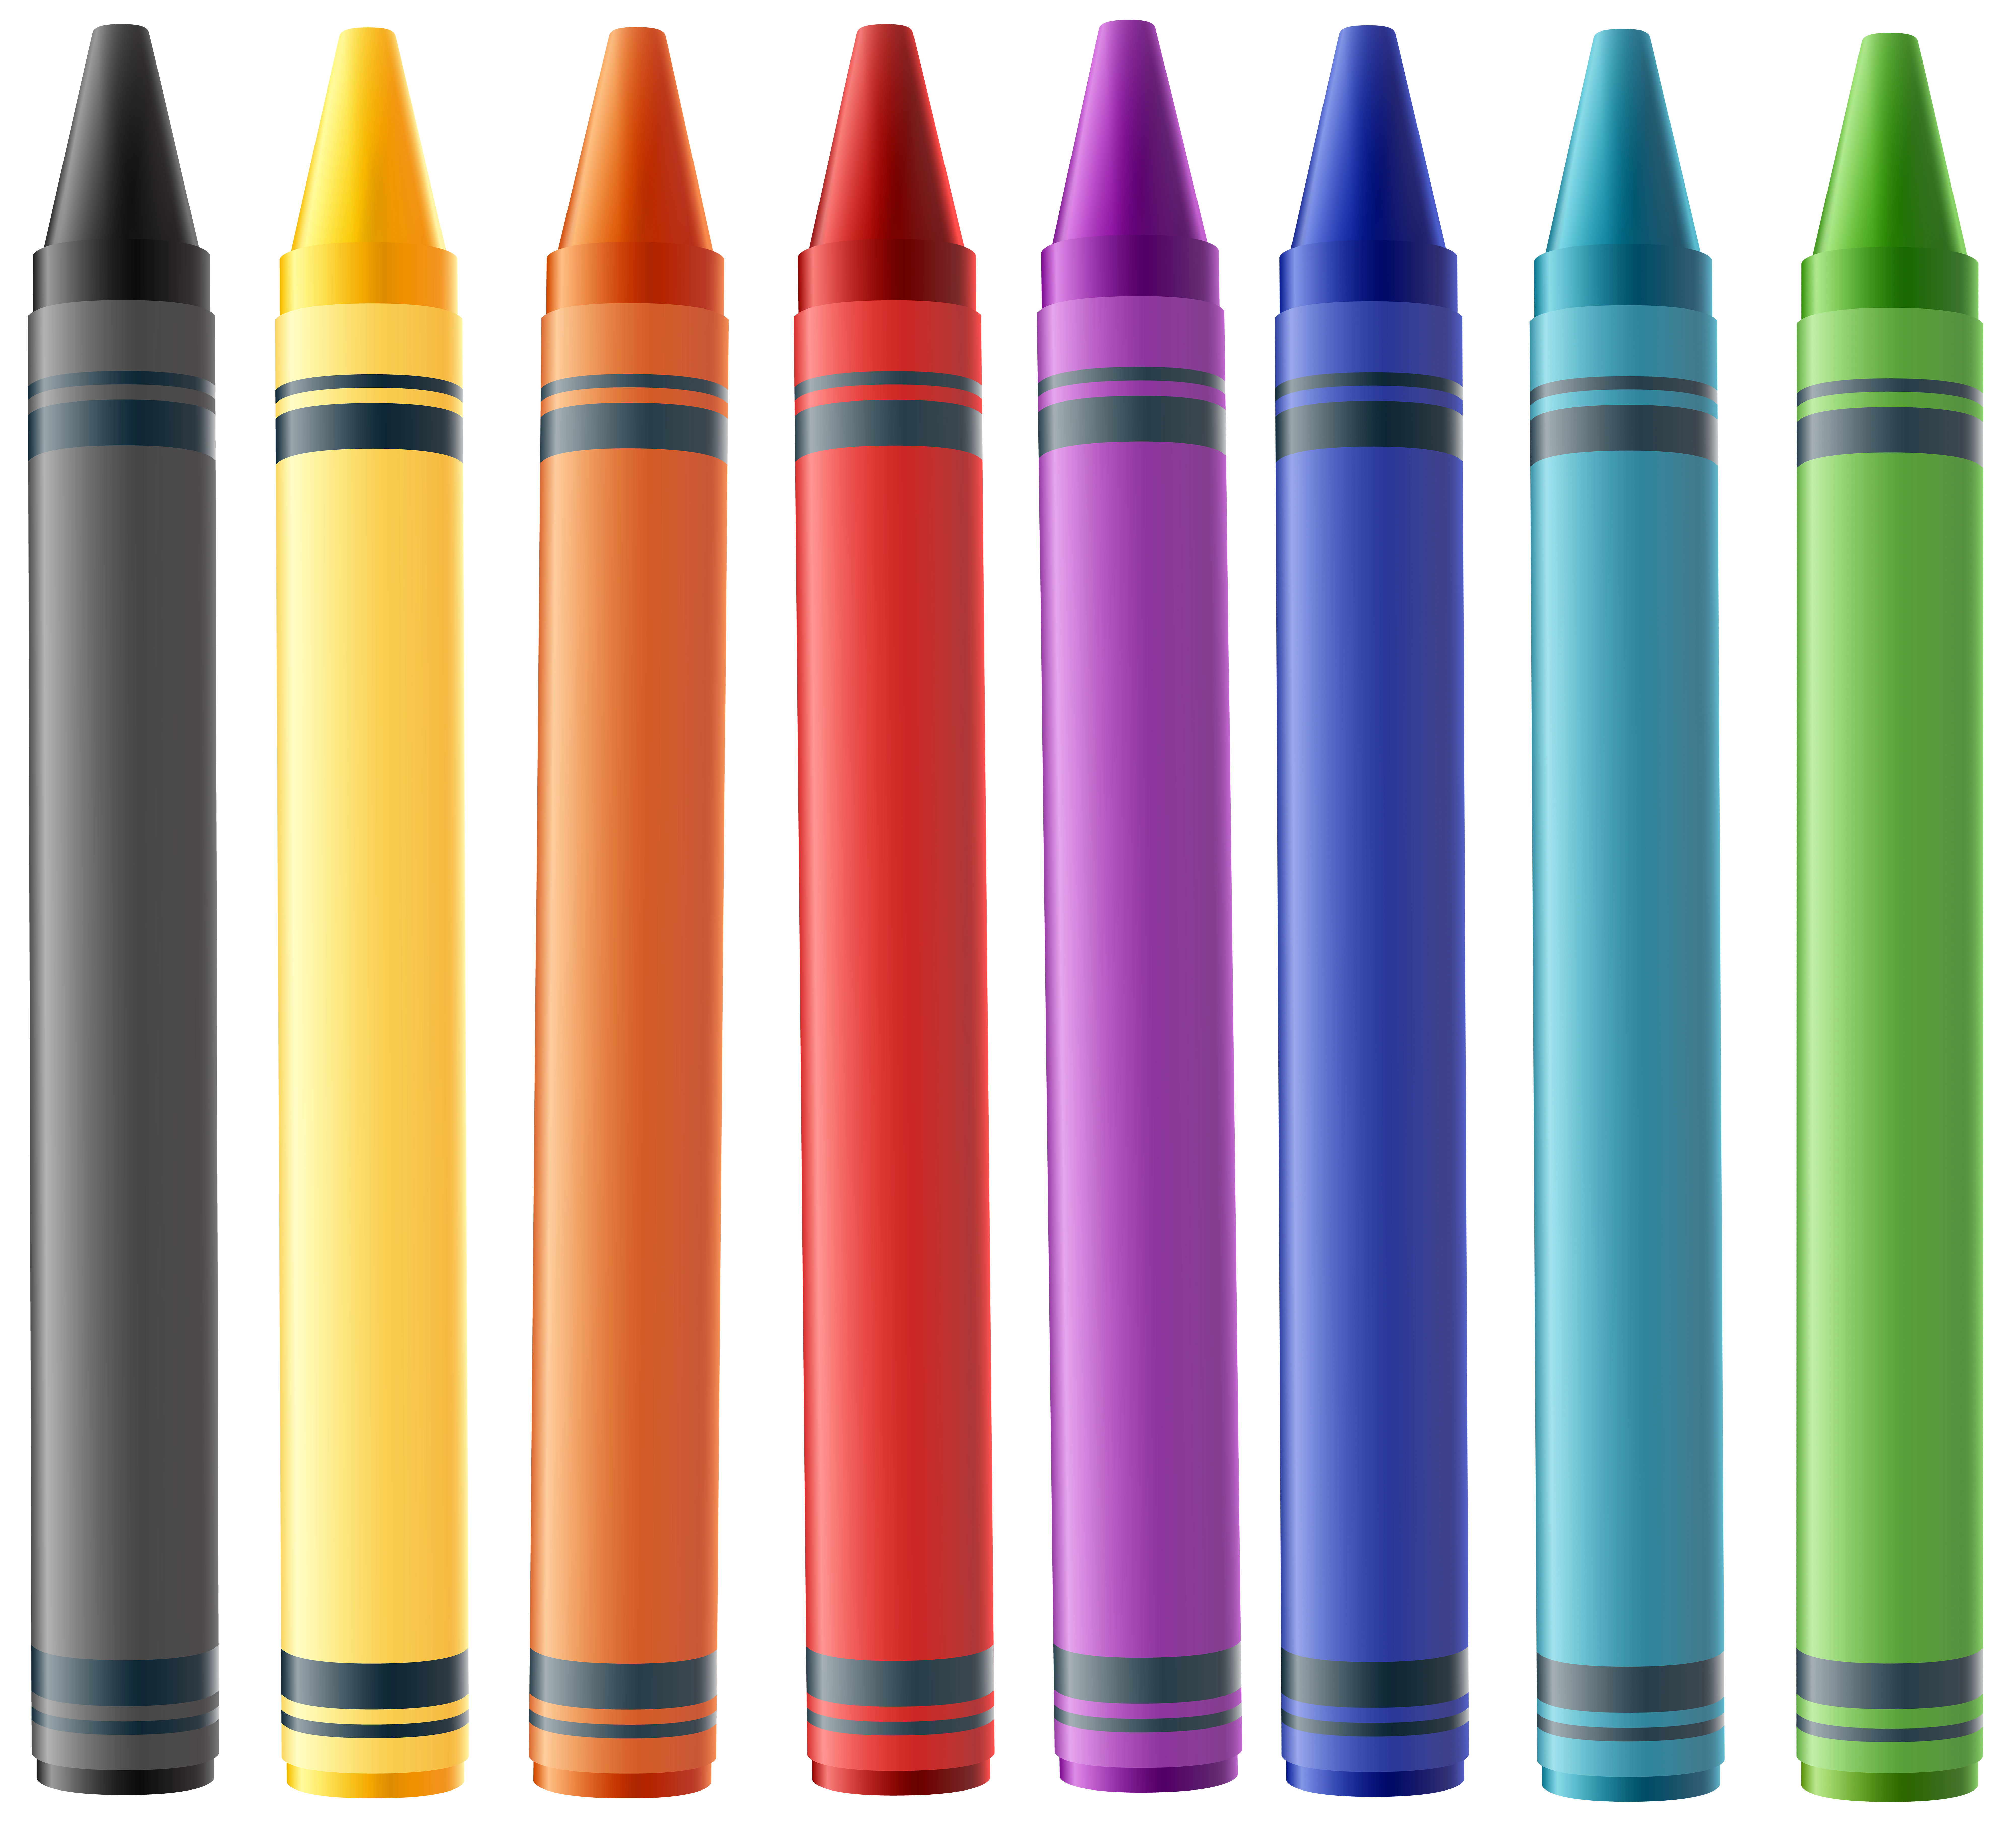 Colorful Crayons PNG Clip Art Image.